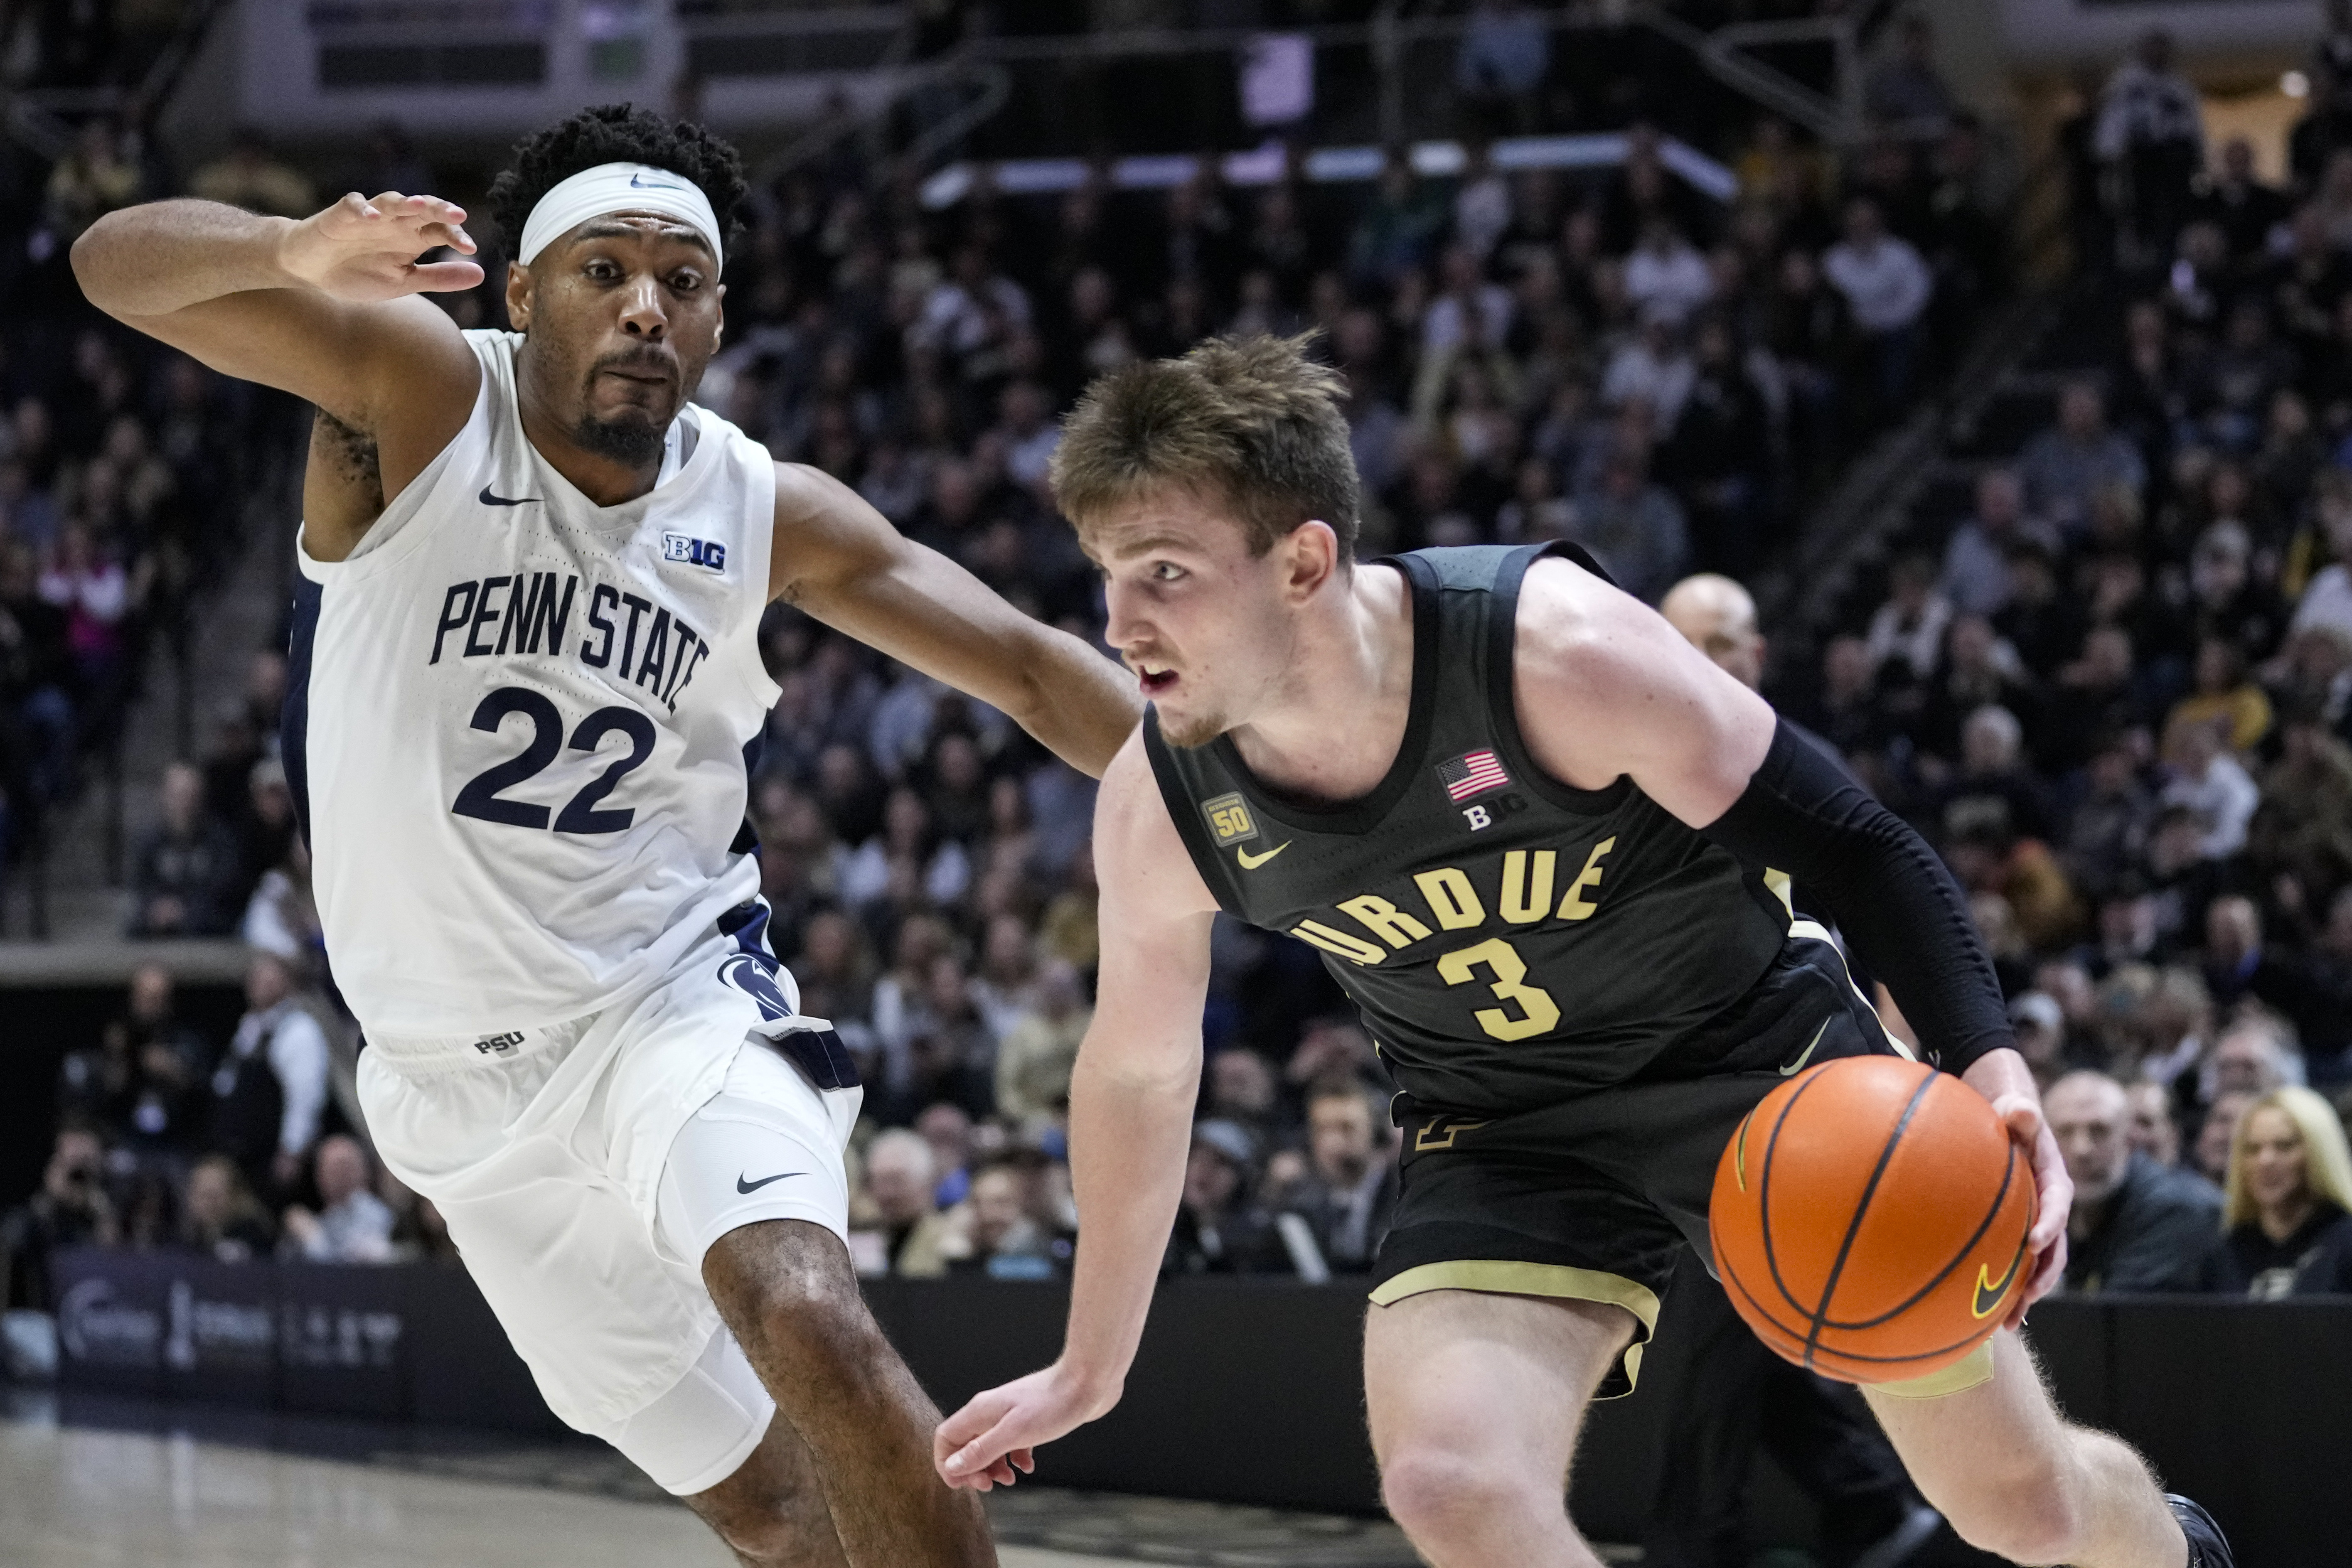 What channel is the Penn State basketball game on today vs.  Purdue?